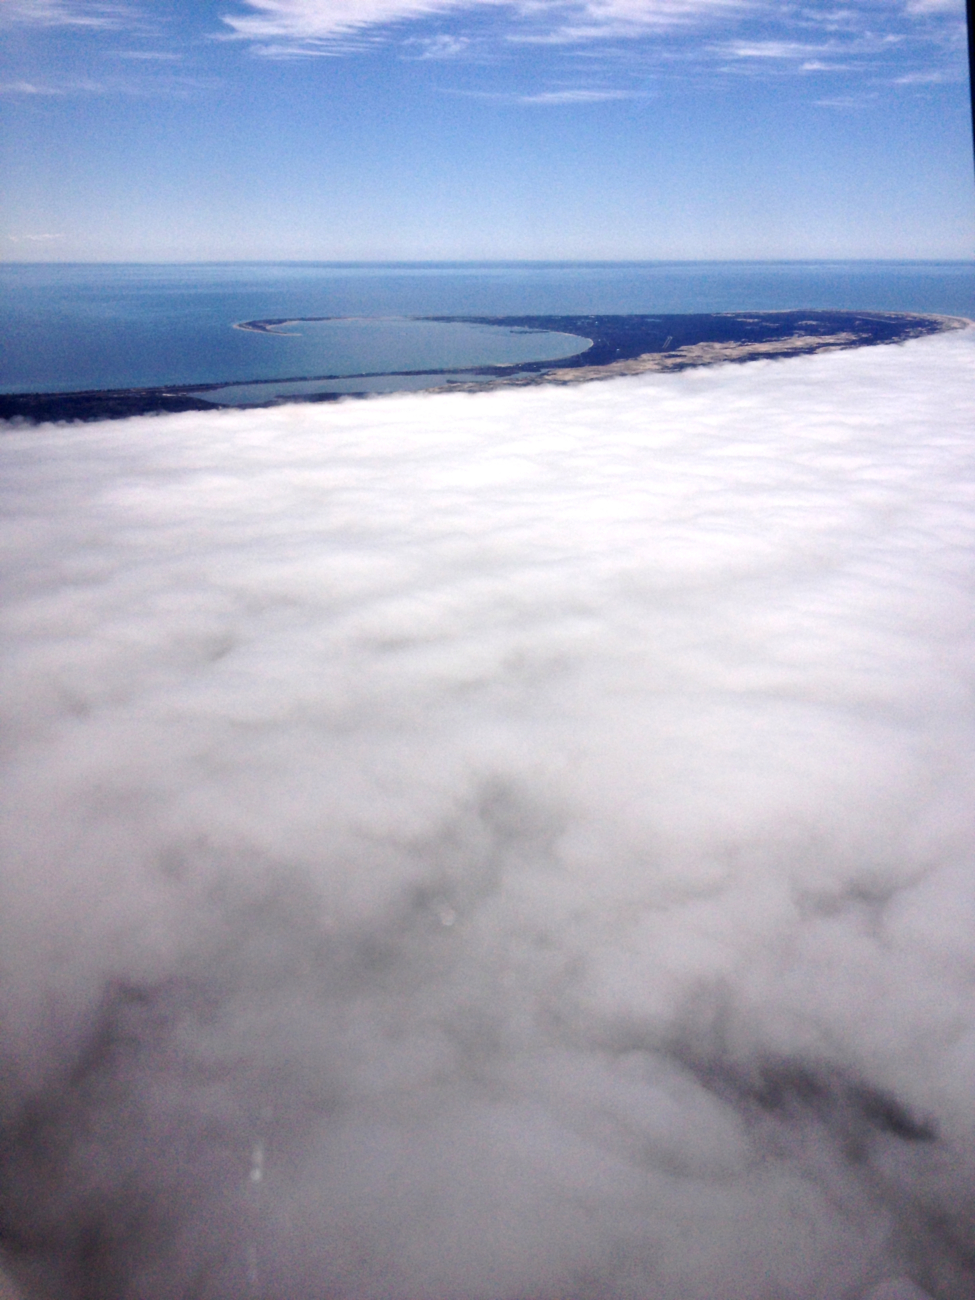 Fog on the Atlantic side of Cape Cod with Provincetown and Massachusetts Bayseen in the upper third of the image